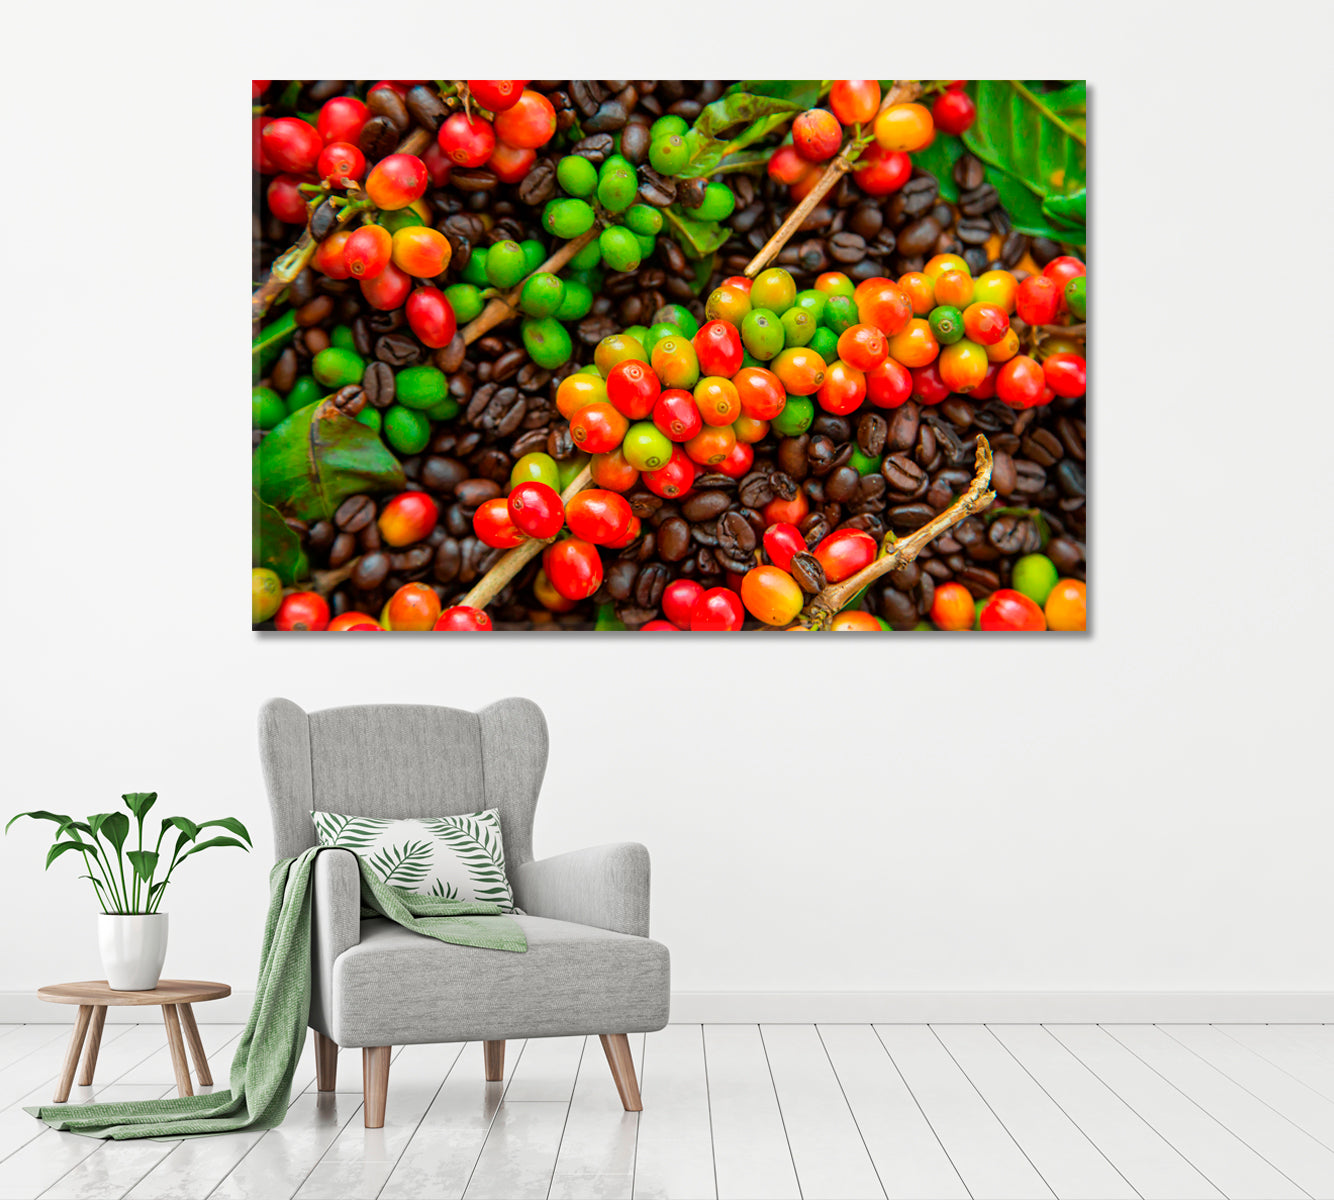 Coffee Berries and Coffee Beans Canvas Print ArtLexy 1 Panel 24"x16" inches 